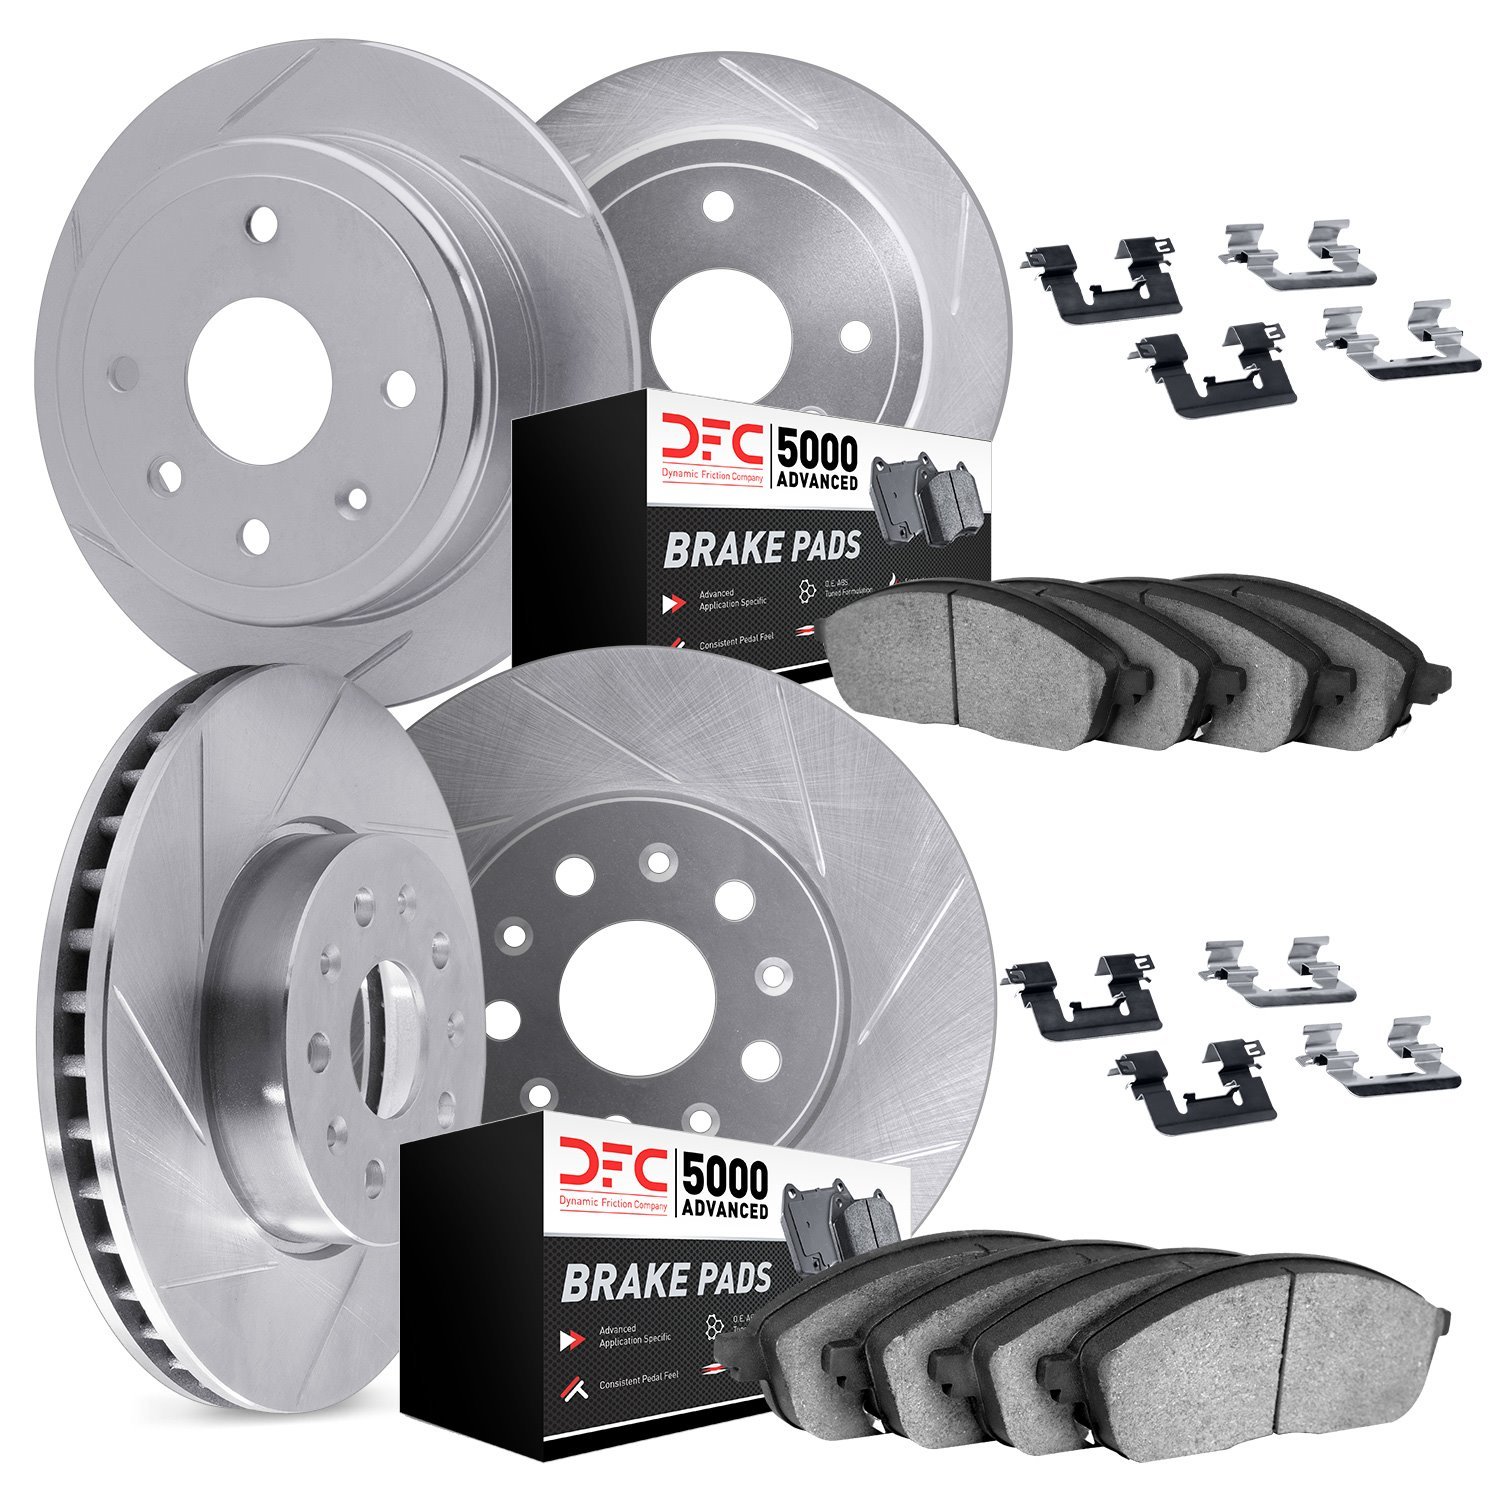 5514-42003 Slotted Brake Rotors w/5000 Advanced Brake Pads Kit & Hardware [Silver], 2003-2006 Mopar, Position: Front and Rear